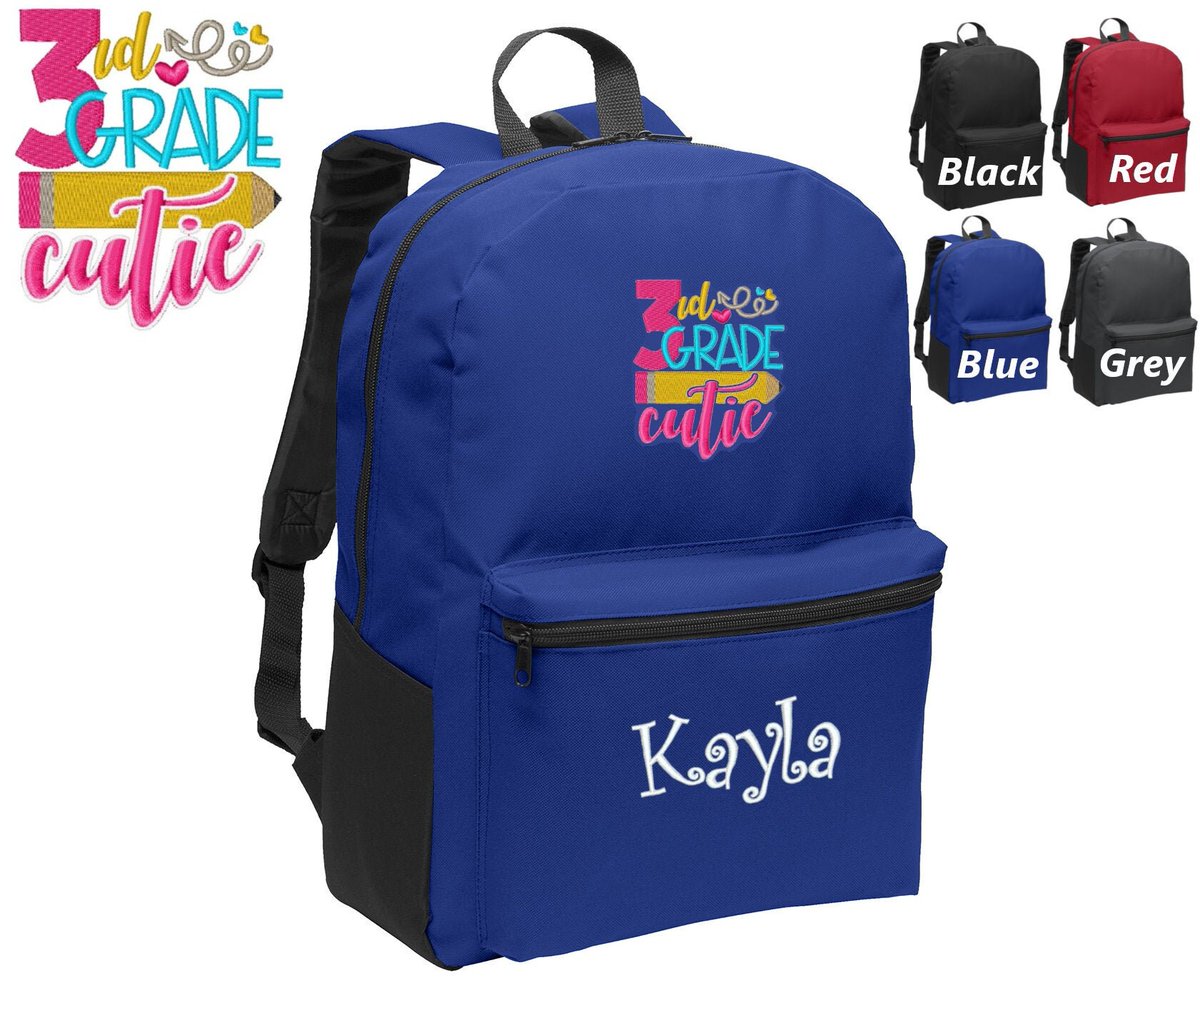 Personalized Kids Third Grade Backpack Embroidered Cutie Design, Funny Backpack, Monogrammed Name, Perfect Kids School Sports Gift etsy.com/listing/789156…
 #GirlsGift #BoysGift